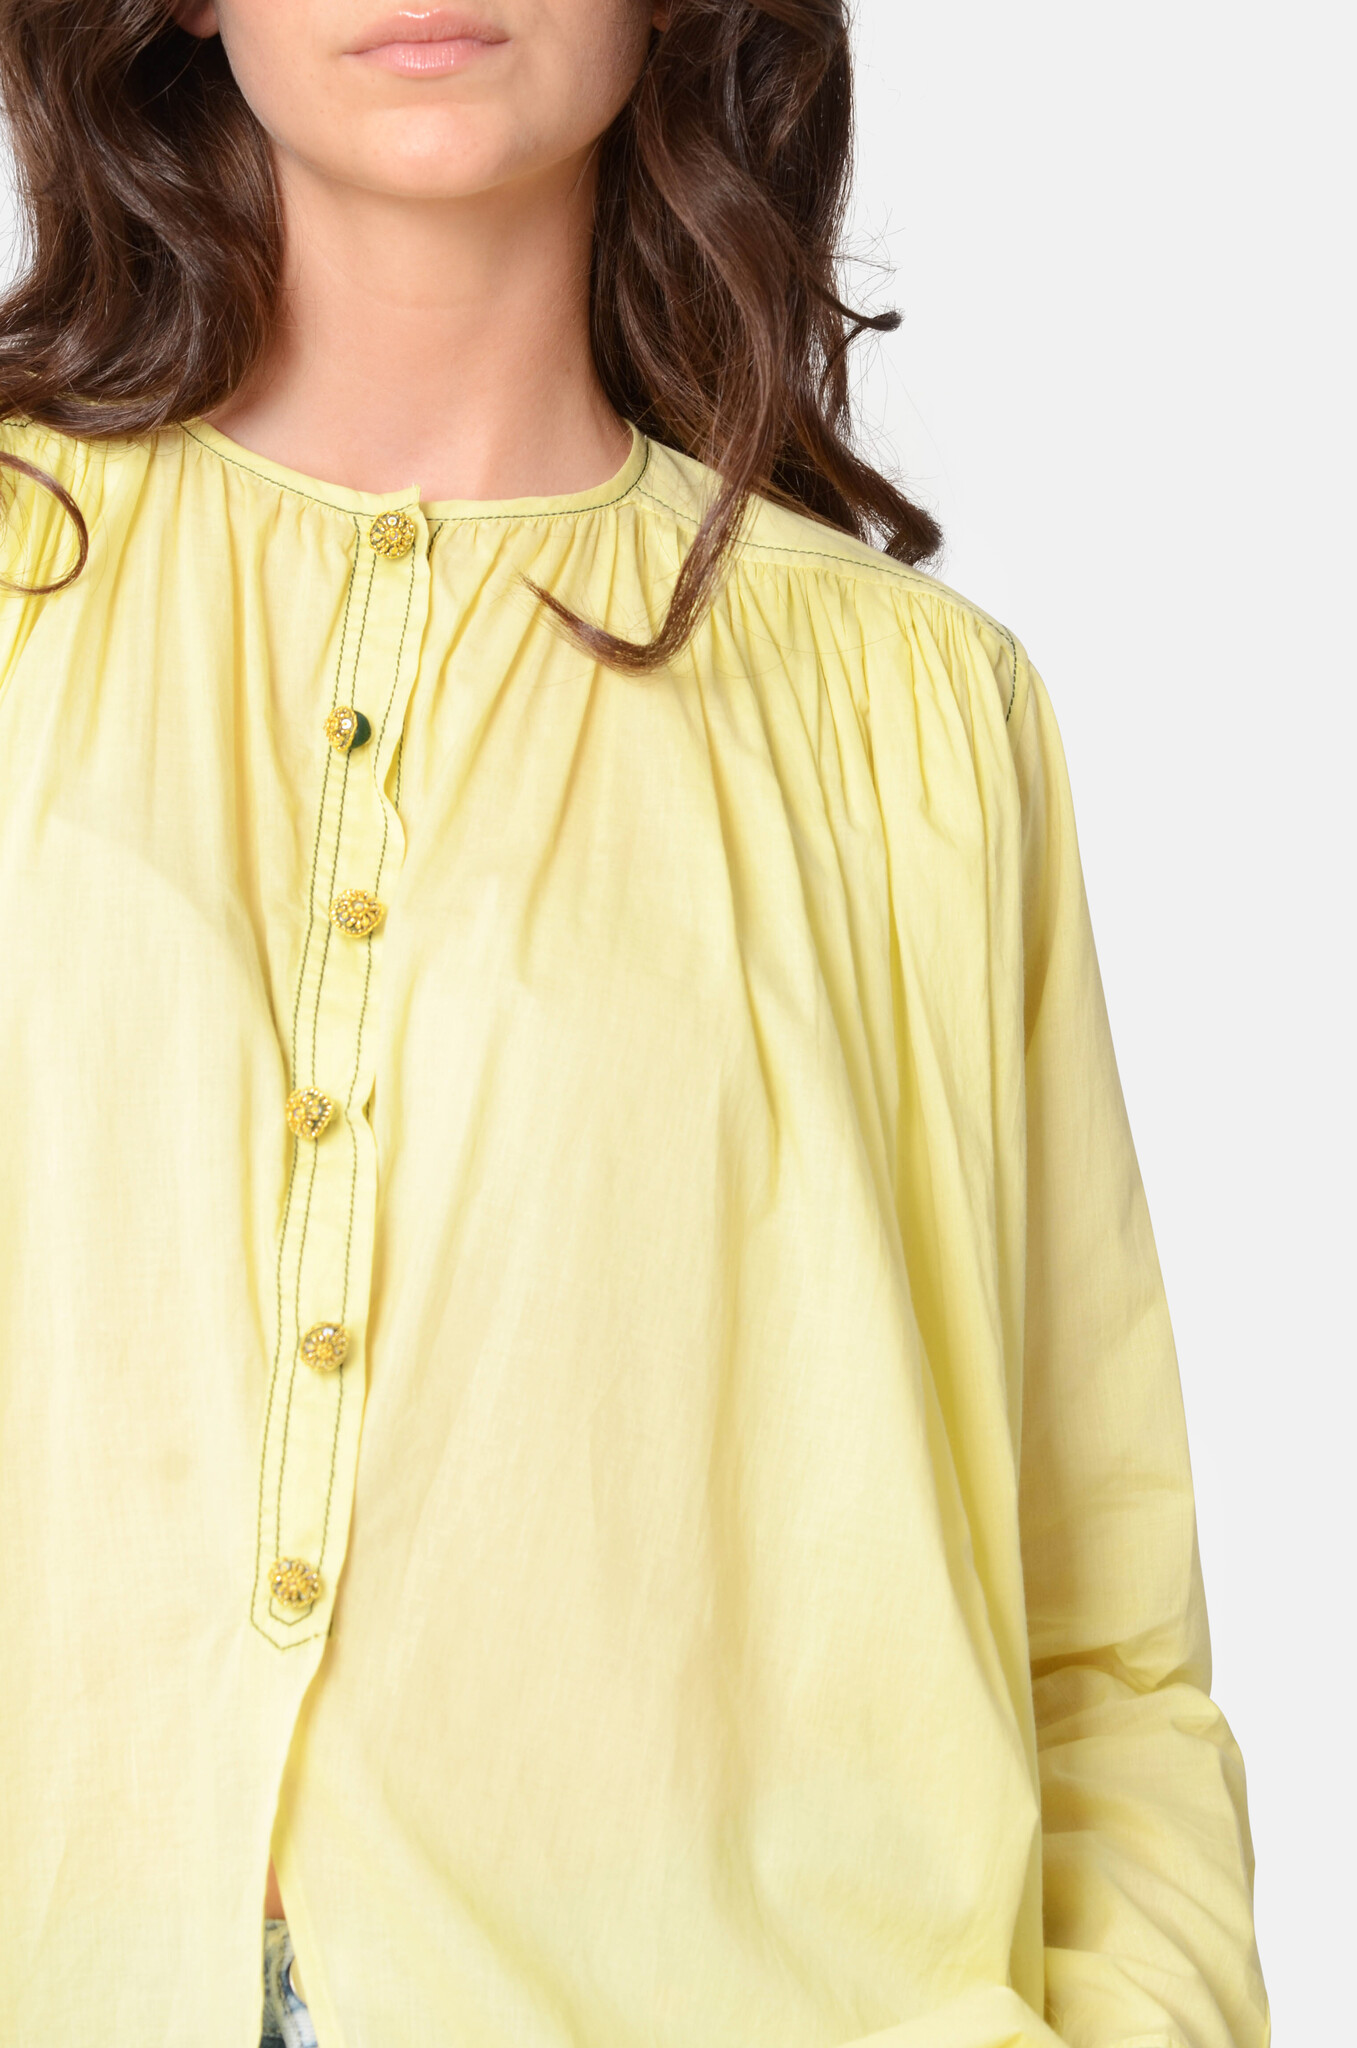 Cigar Blouse in Yellow-5